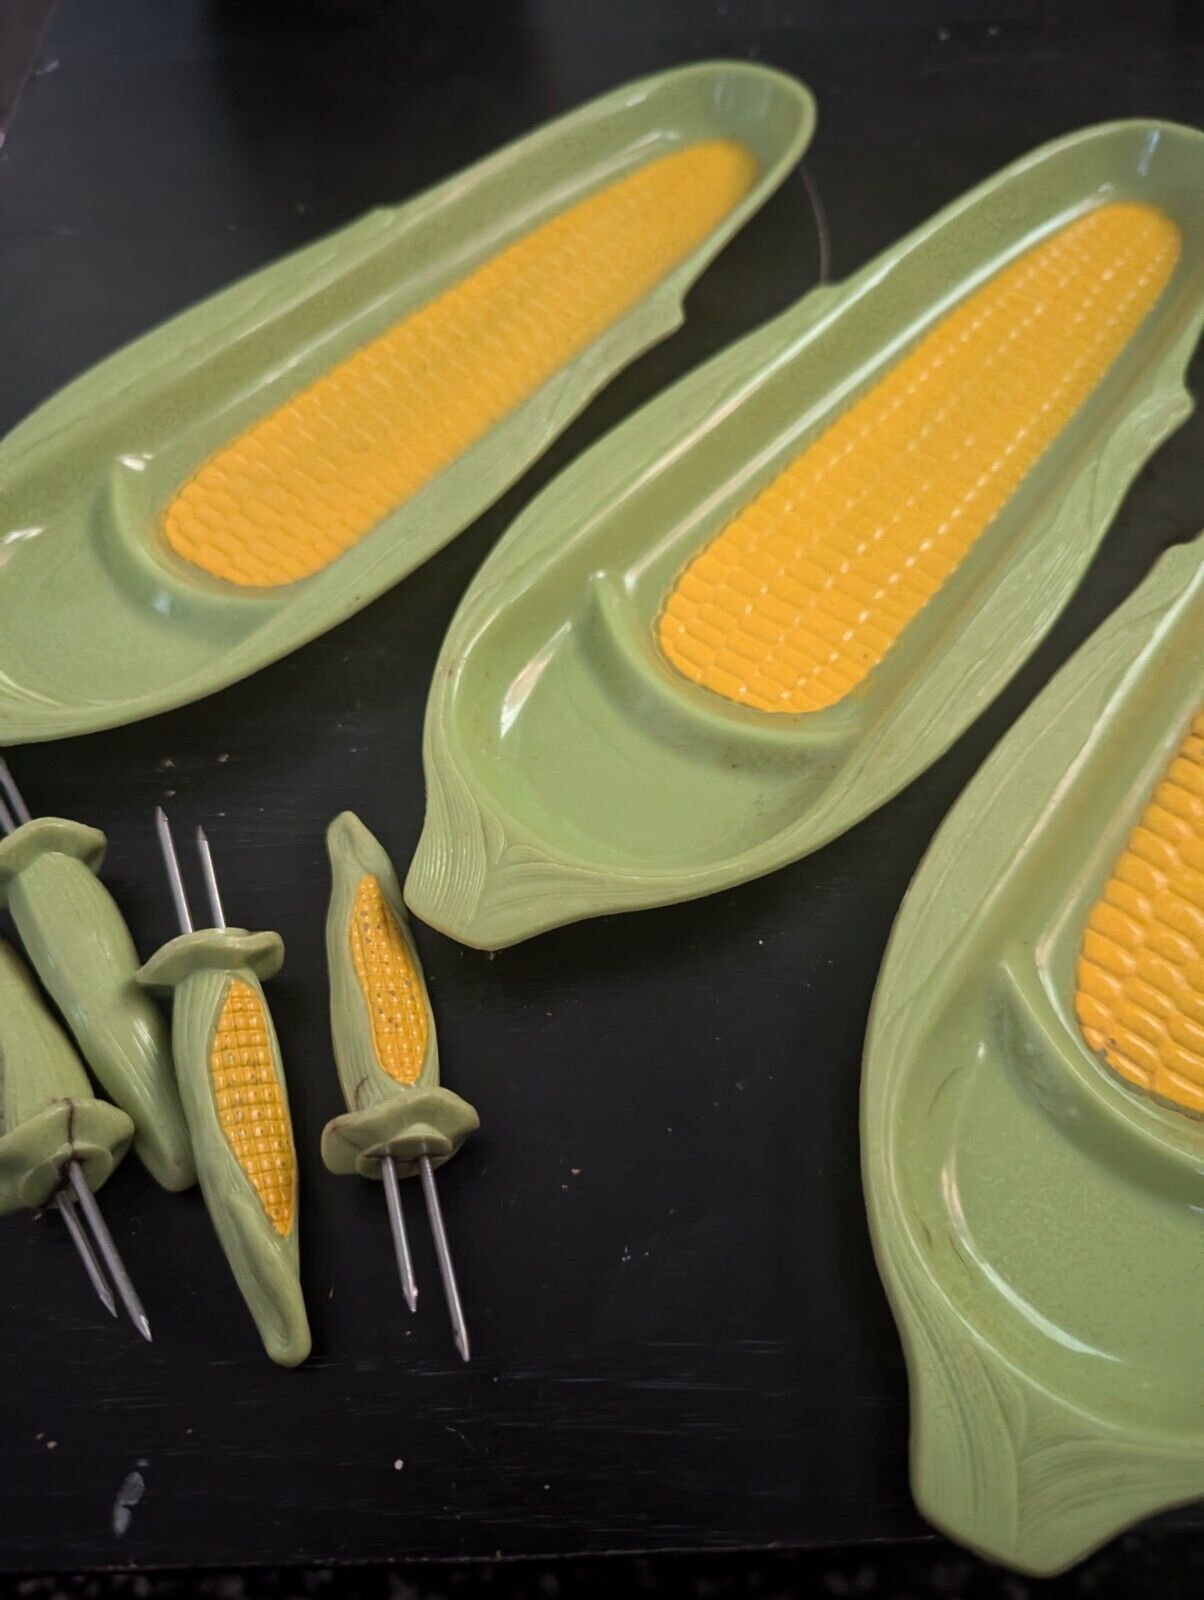 Vintage Corn on the Cob Serving Dishes Plates Holders Plastic Set 3 Green Yellow